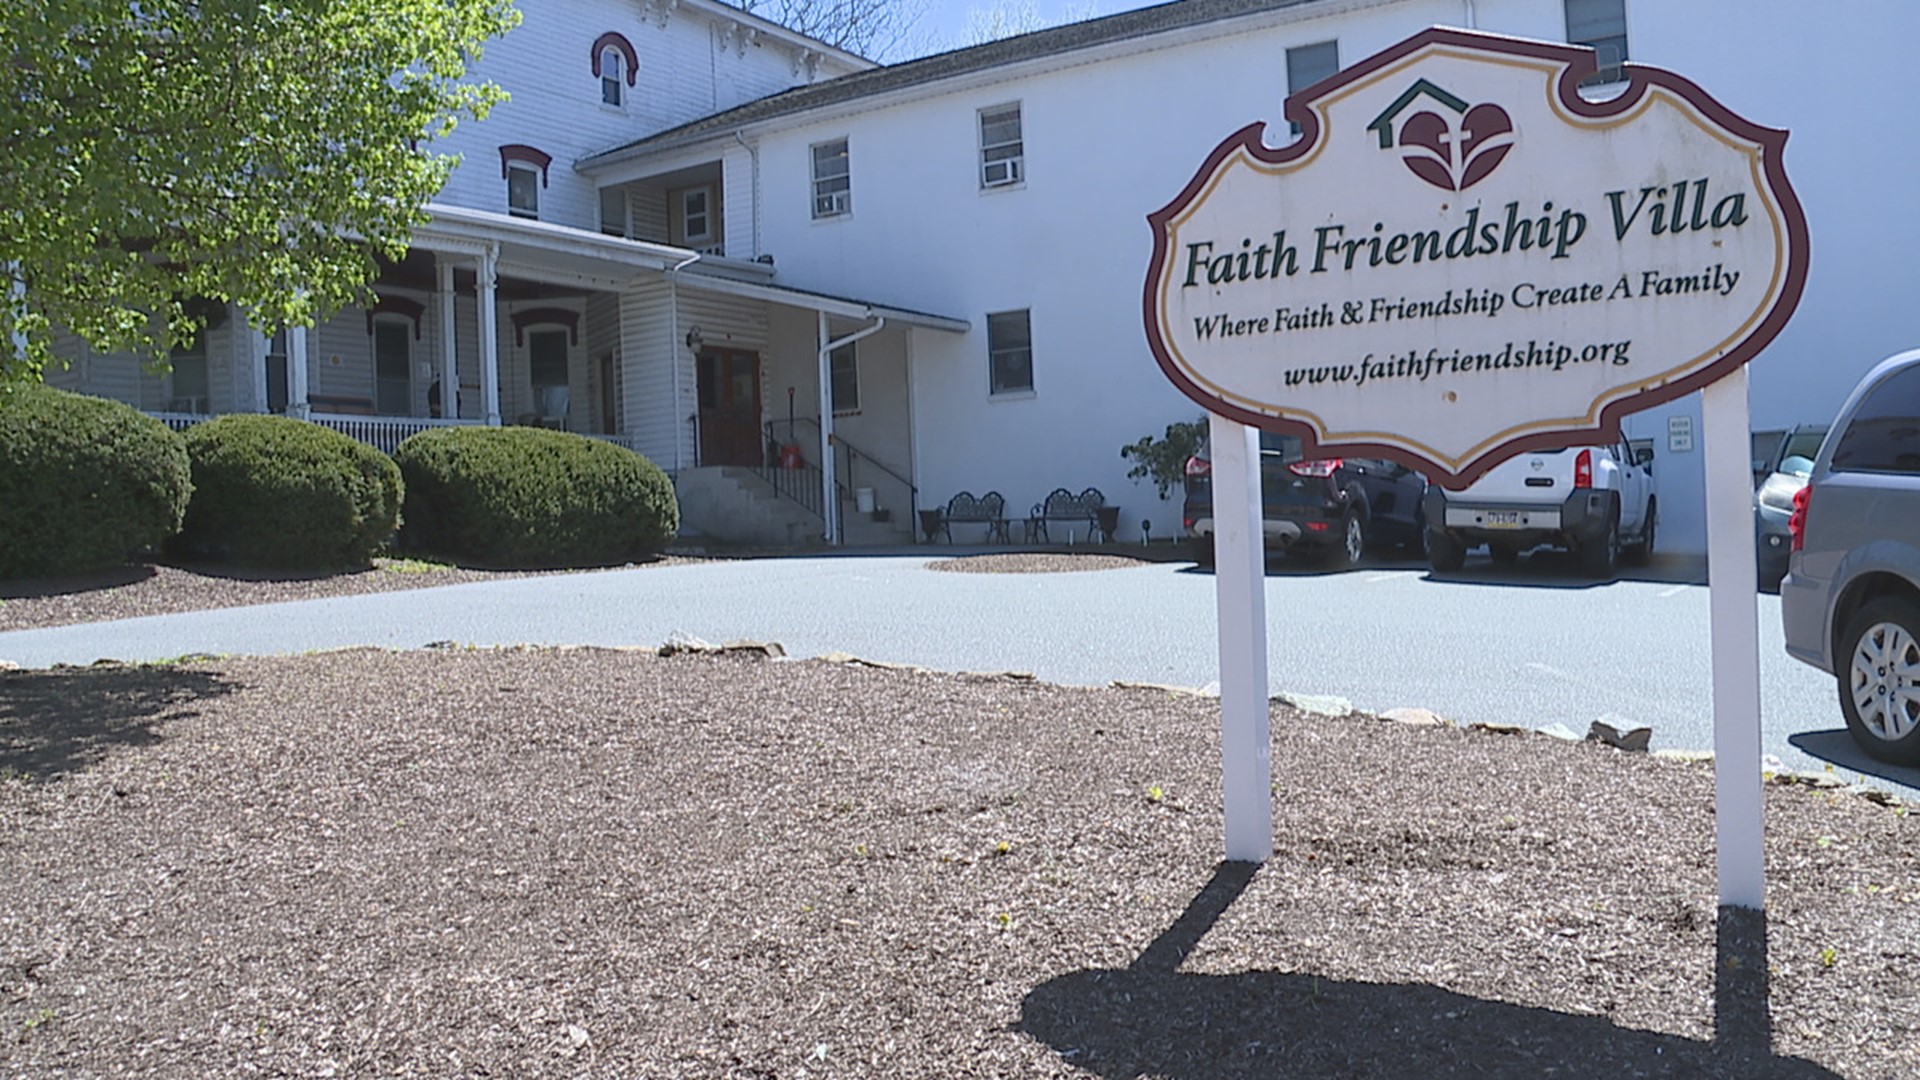 A personal care home in Lancaster County is facing a financial crisis and is asking the community for support.